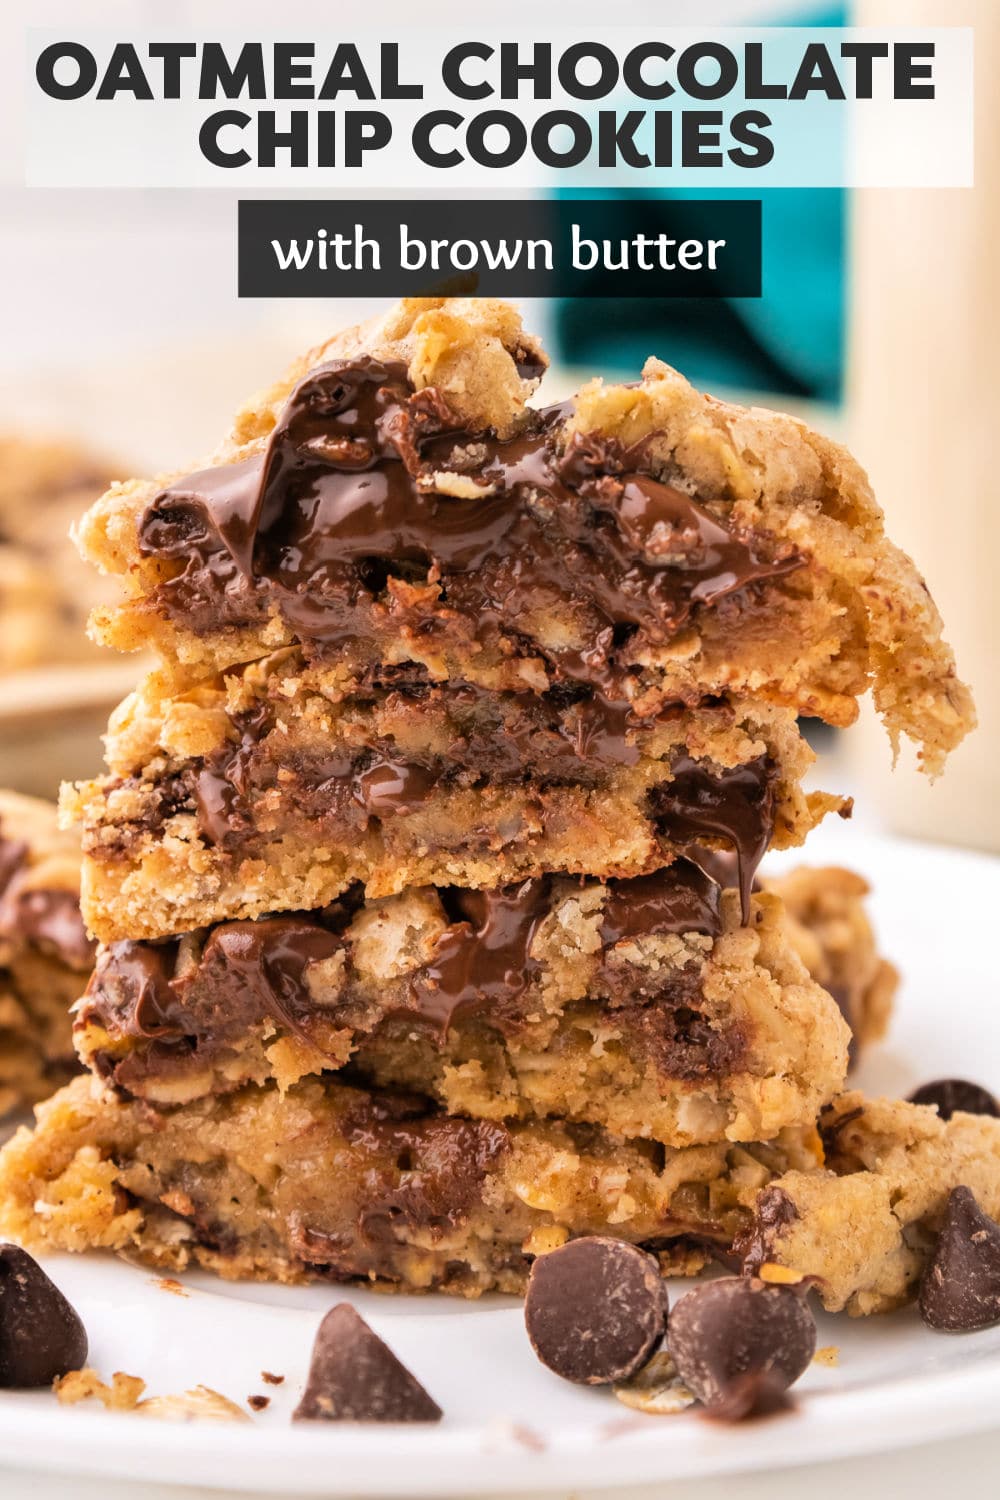 Thick & chewy Brown Butter Oatmeal Chocolate Chip Cookies are filled with oats, chocolate chips, and nutty brown butter. Meet your new favorite cookie! | www.persnicketyplates.com